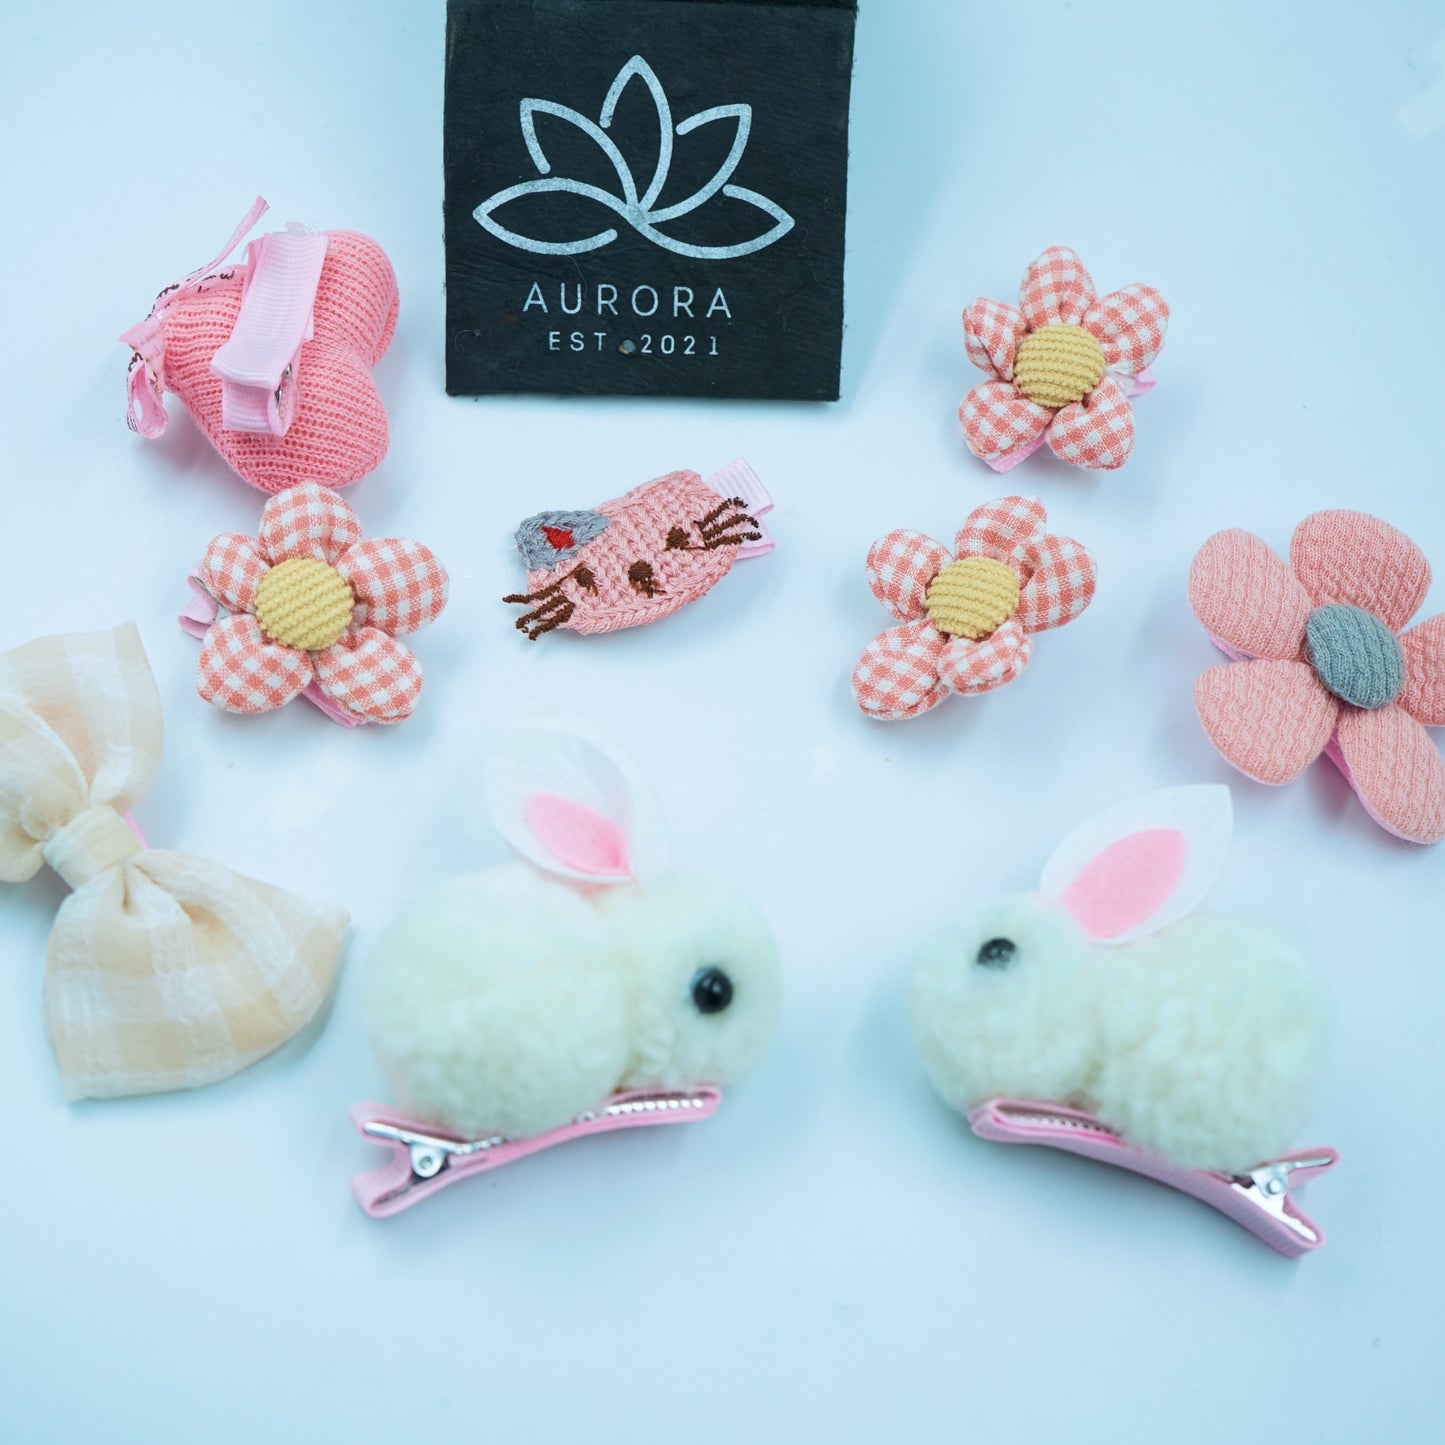 Buy Aurora Cute Hair Clips Collection | Trendy Design | 9 pcs in 1 packet | B56